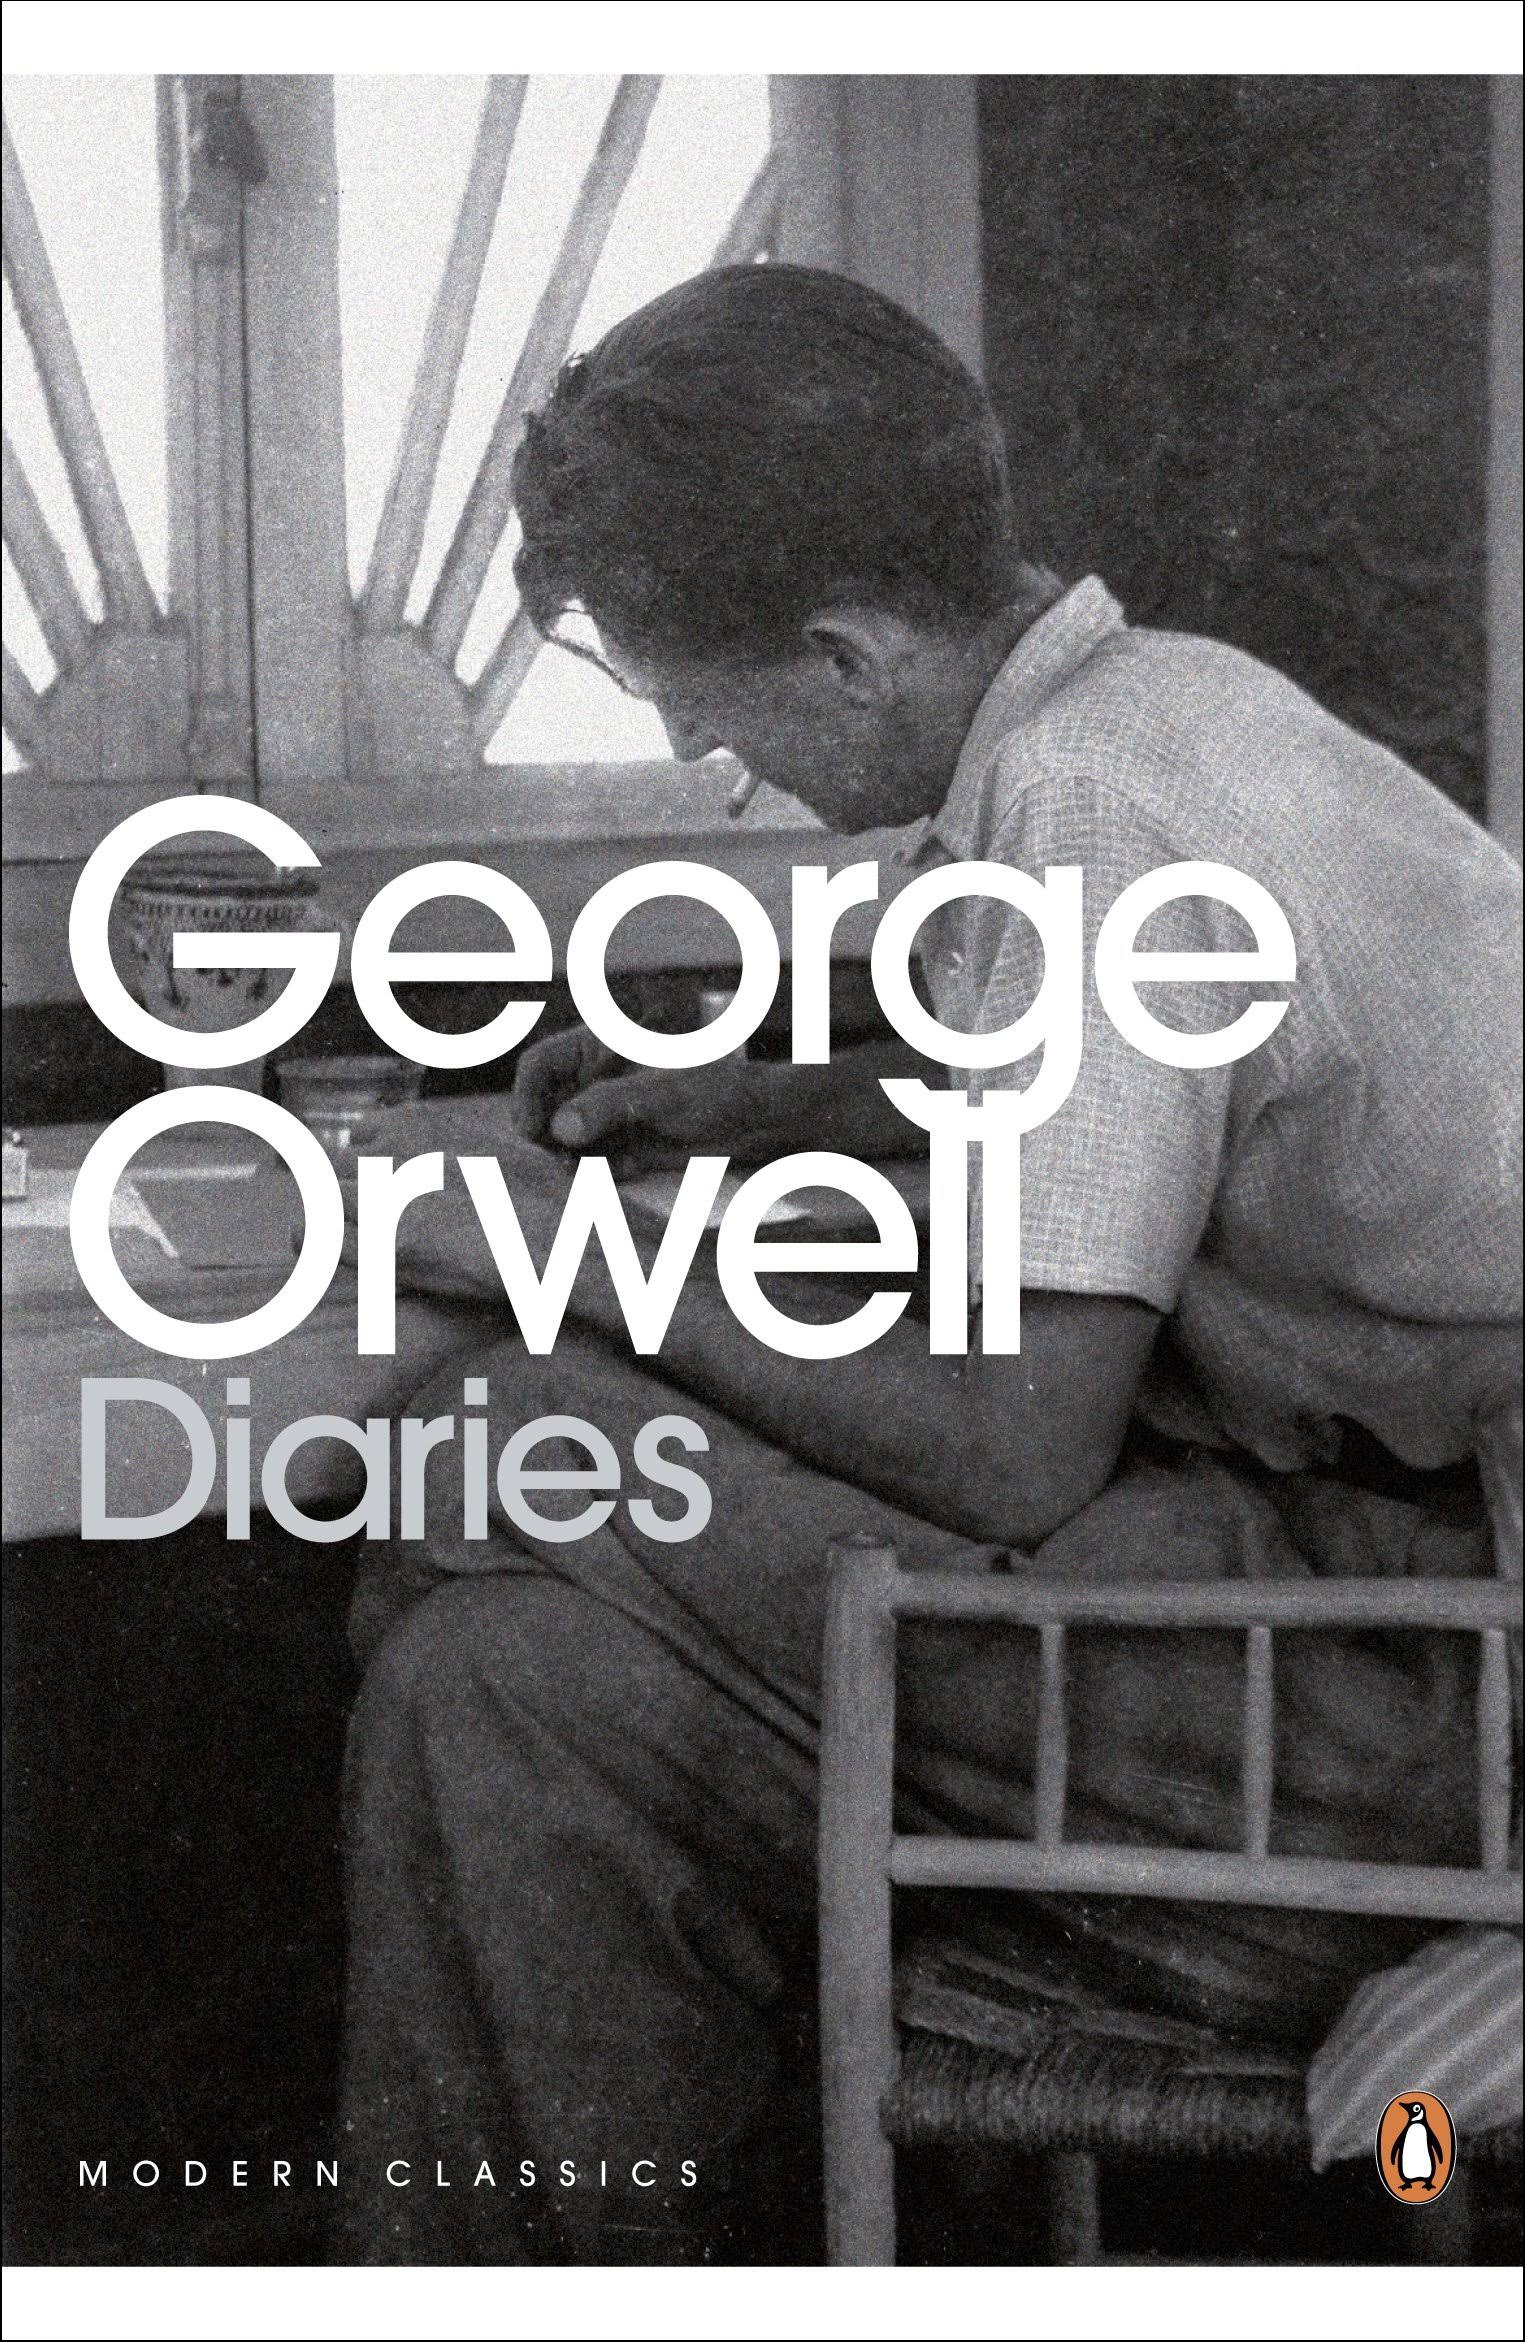 The Orwell Diaries by George Orwell